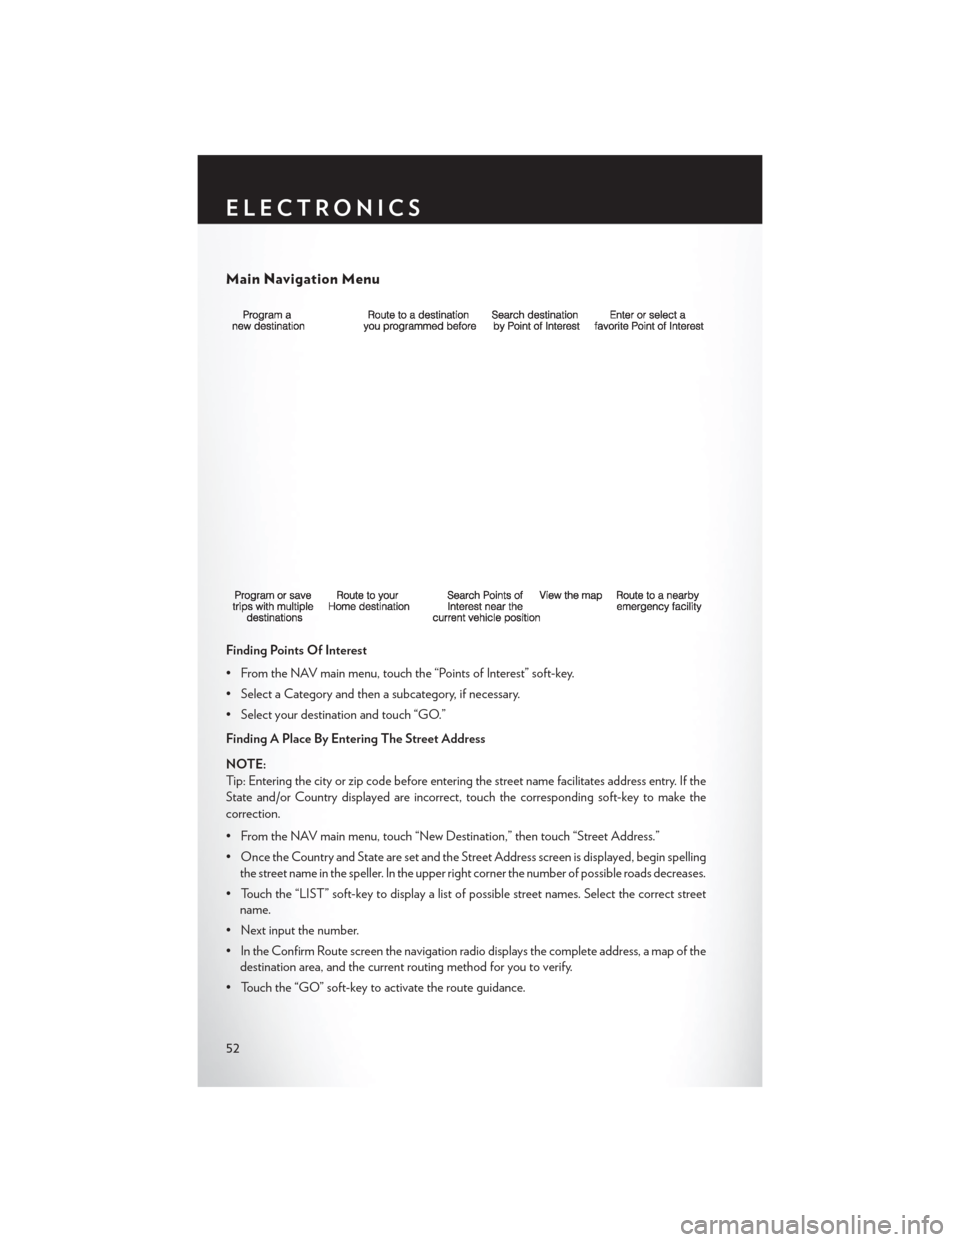 CHRYSLER 200 2014 1.G Workshop Manual Main Navigation Menu
Finding Points Of Interest
• From the NAV main menu, touch the “Points of Interest” soft-key.
• Select a Category and then a subcategory, if necessary.
• Select your des